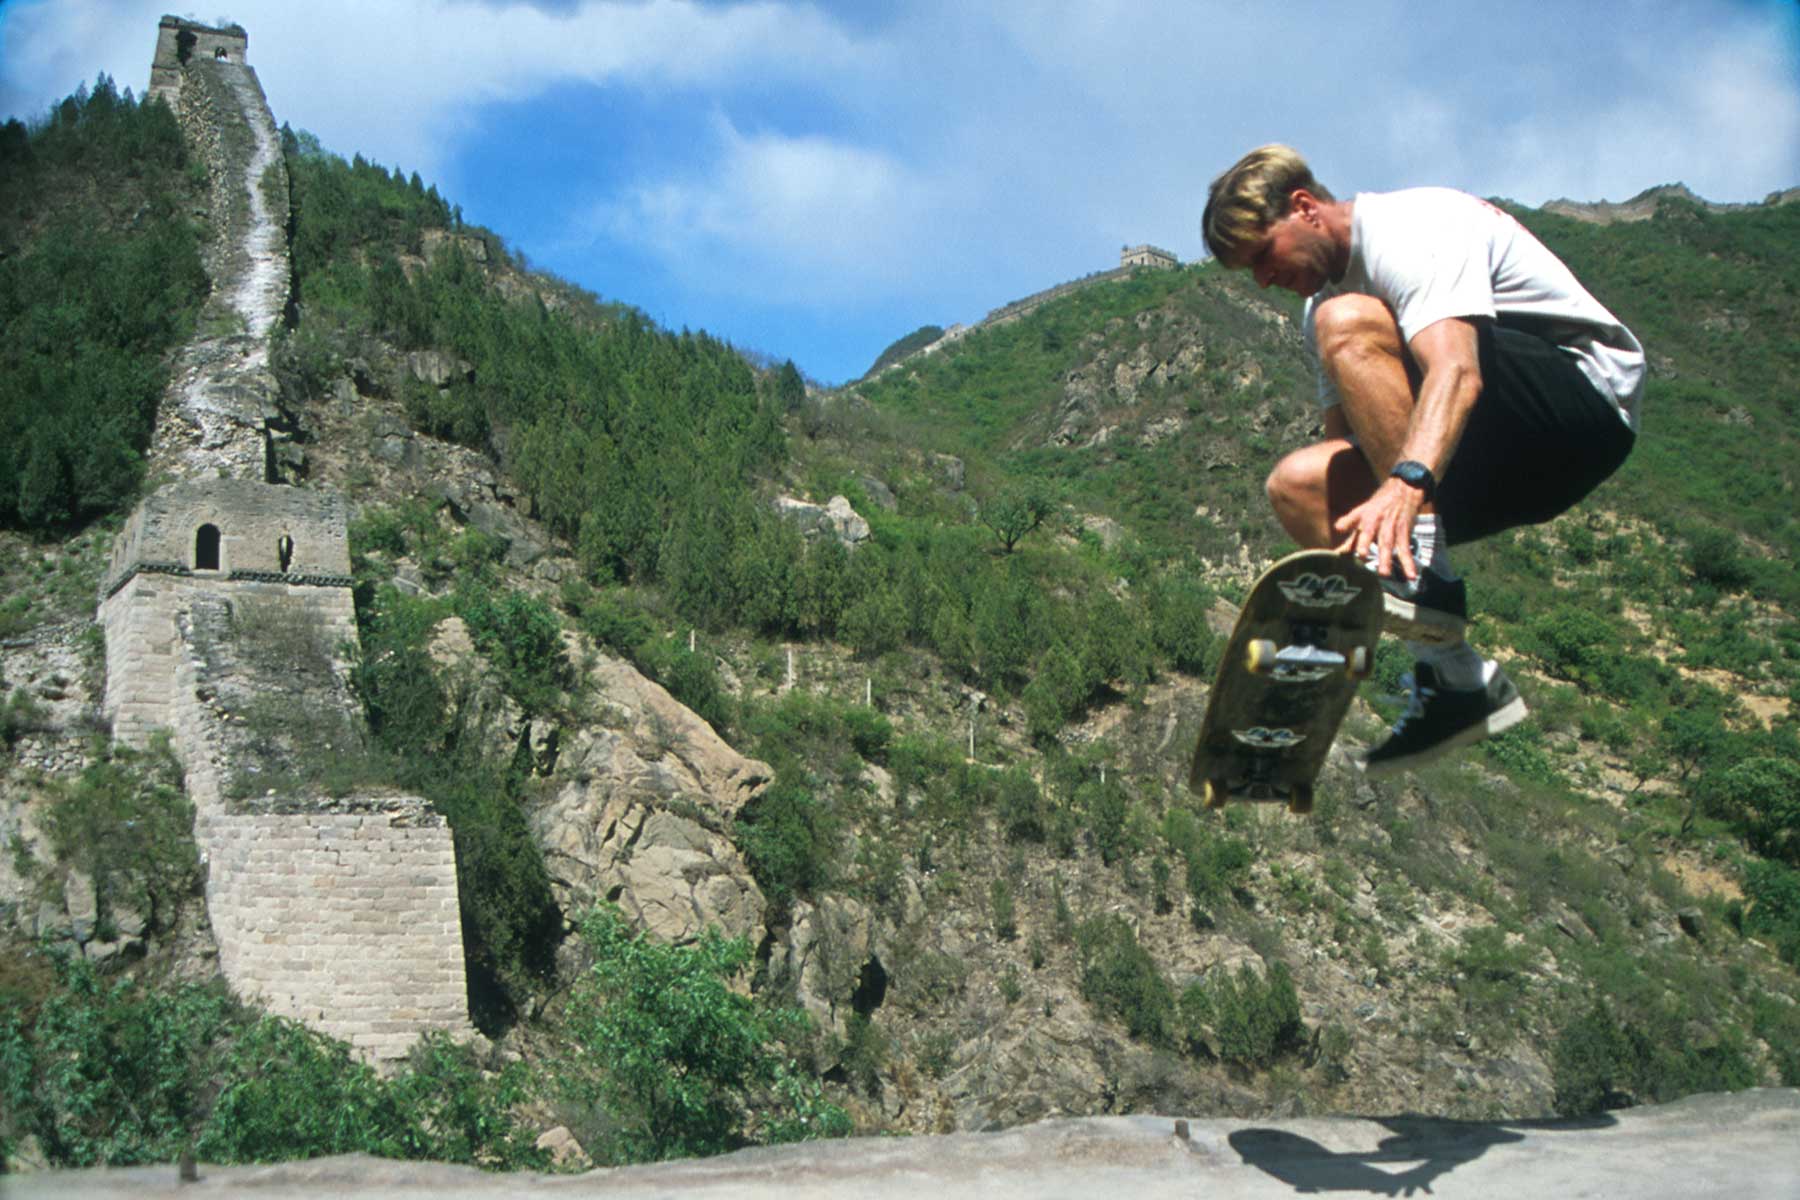 Surf Doctor Steven Andrew Martin skateboarding on the Great Wall of China | Peking University study abroad